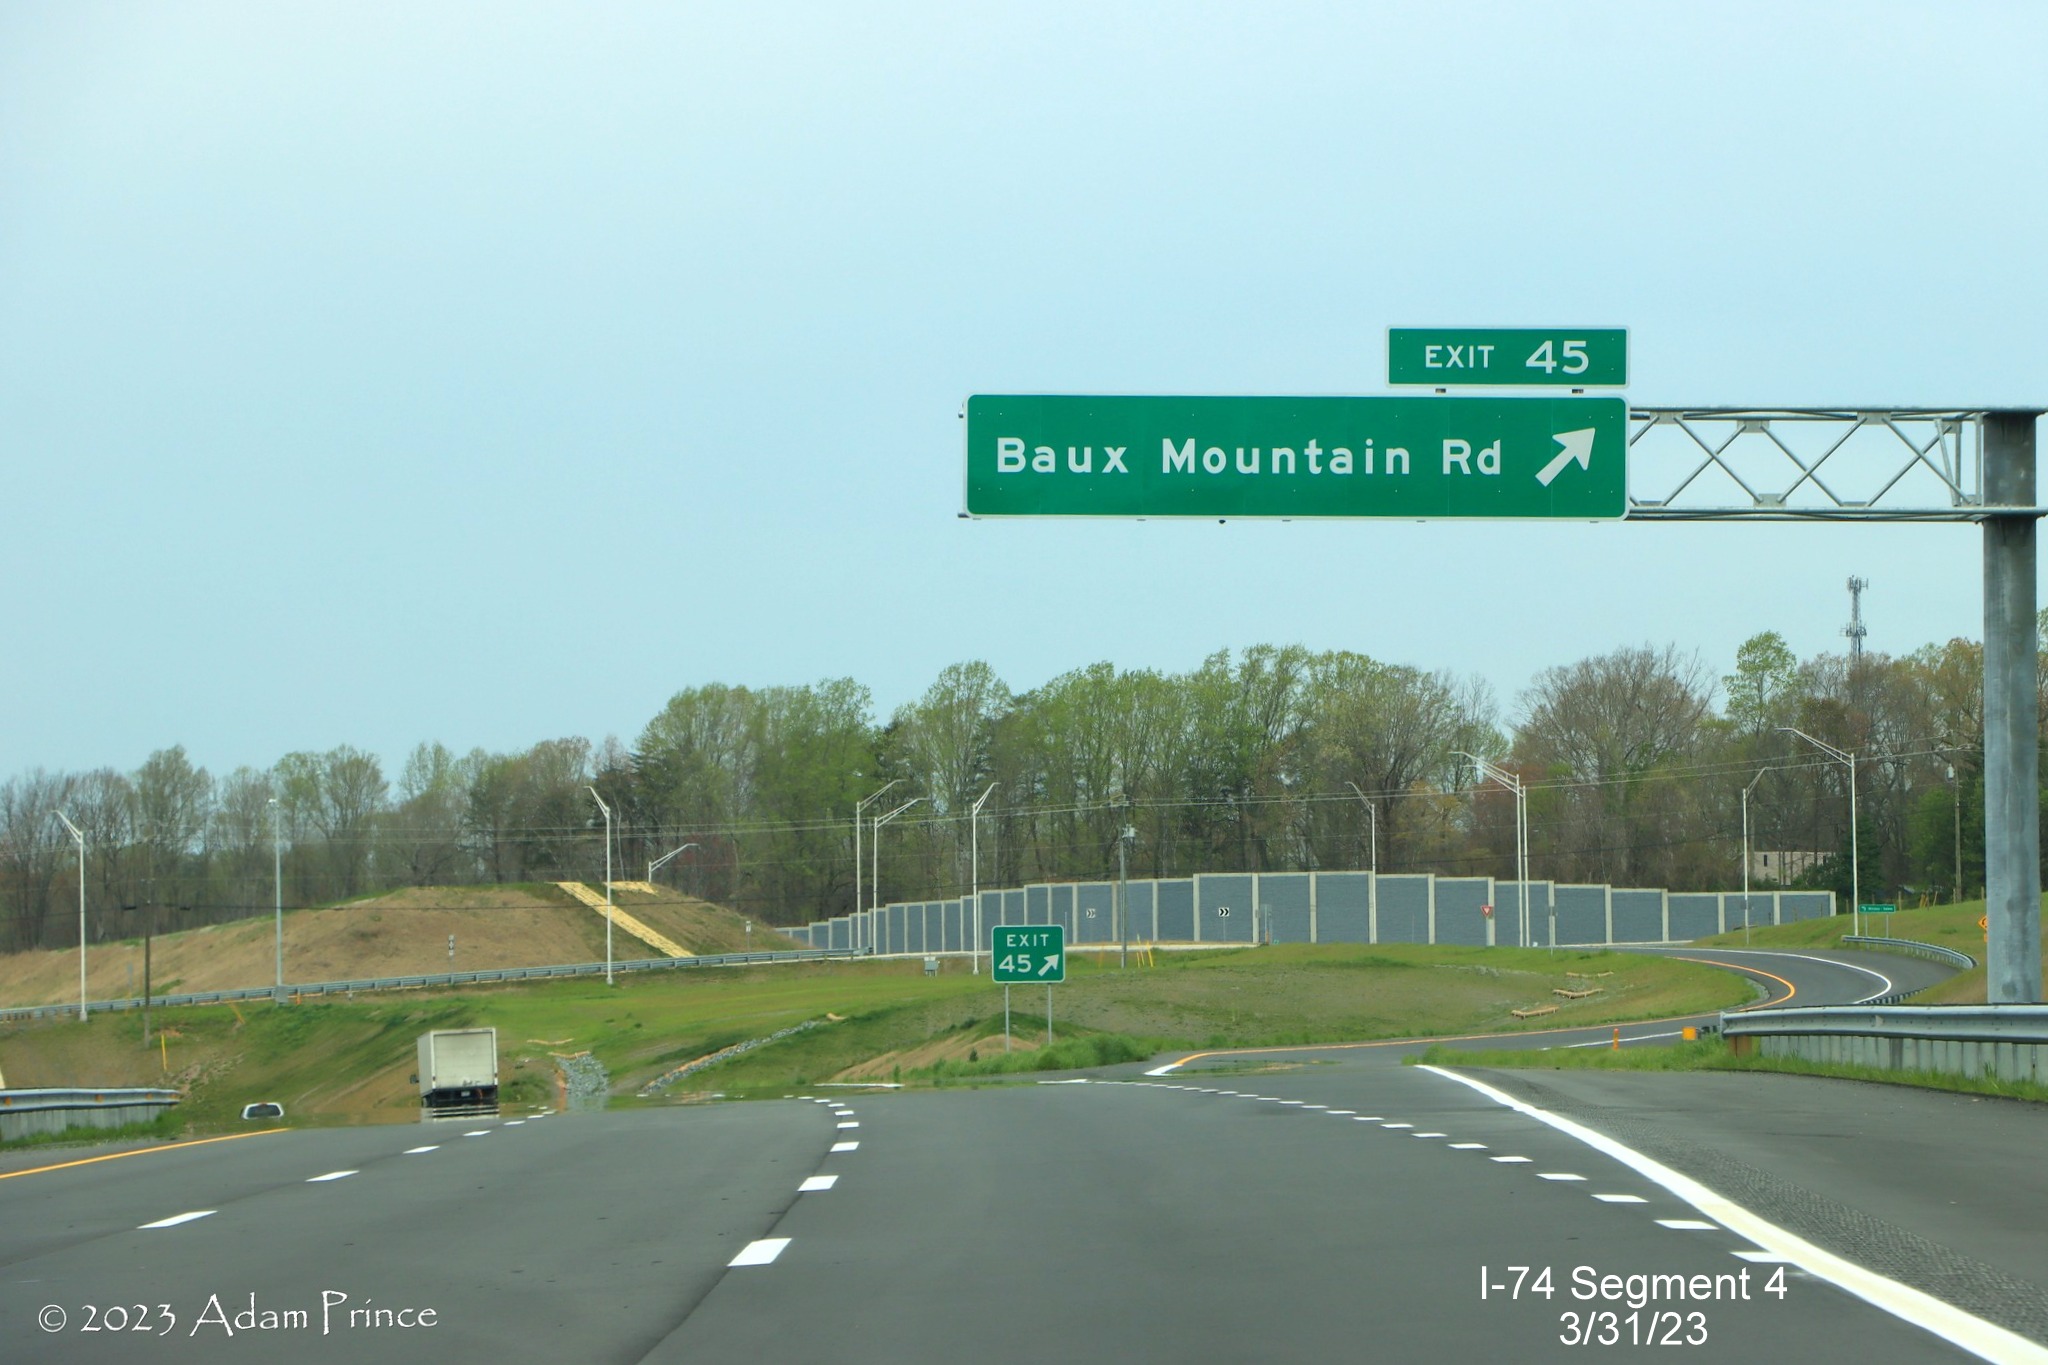 Image of overhead ramp sign for Baux Mountain Road exit on NC 74 (Future I-74) West/Winston-Salem 
        Northern Beltway, Adam Prince, March 2023